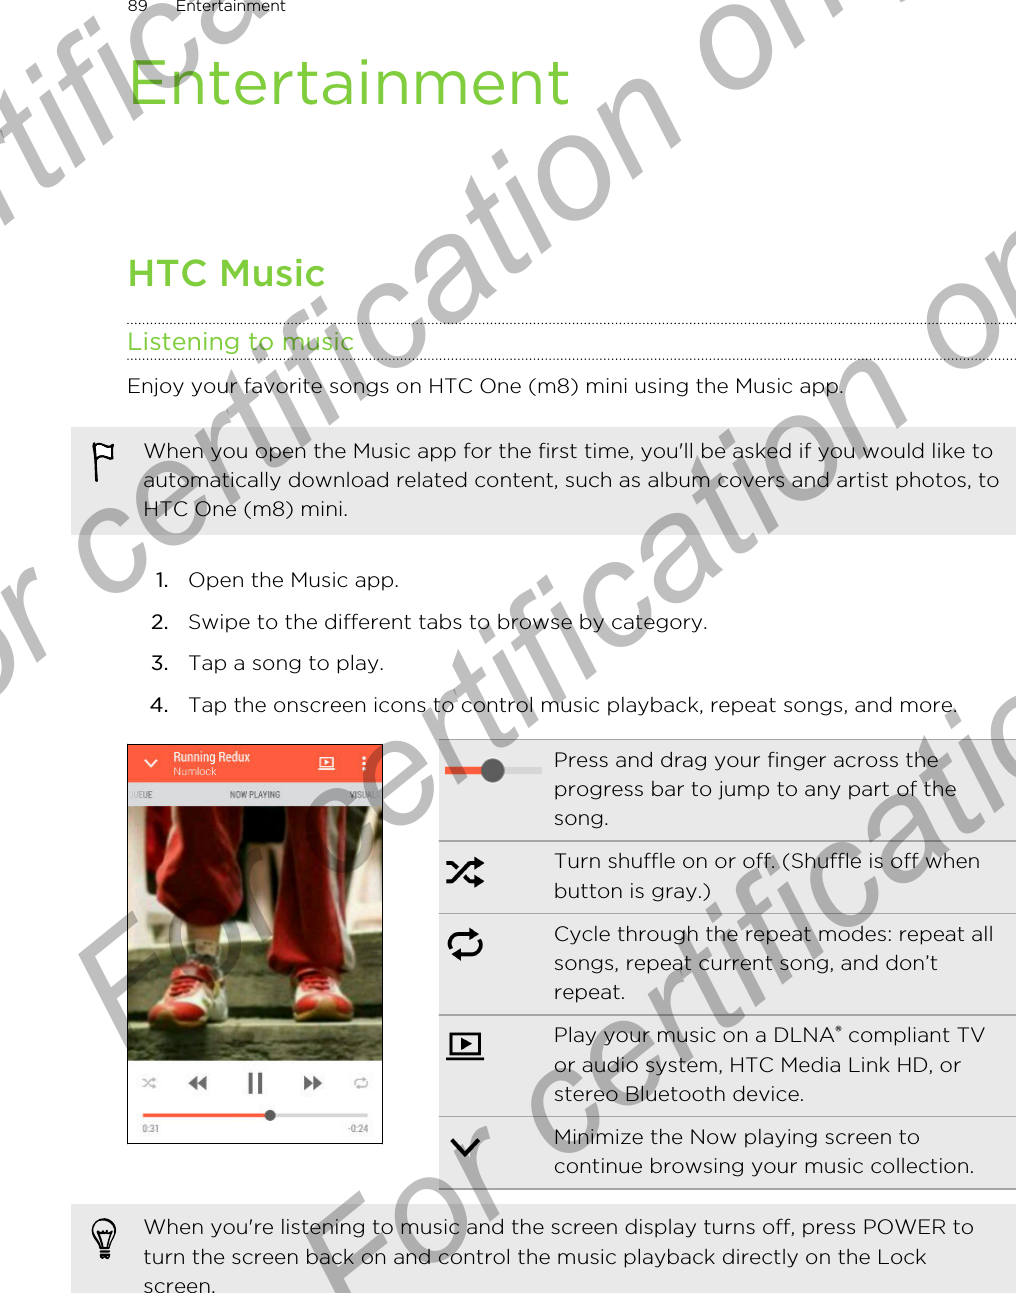 EntertainmentHTC MusicListening to musicEnjoy your favorite songs on HTC One (m8) mini using the Music app.When you open the Music app for the first time, you&apos;ll be asked if you would like toautomatically download related content, such as album covers and artist photos, toHTC One (m8) mini.1. Open the Music app.2. Swipe to the different tabs to browse by category.3. Tap a song to play.4. Tap the onscreen icons to control music playback, repeat songs, and more.Press and drag your finger across theprogress bar to jump to any part of thesong.Turn shuffle on or off. (Shuffle is off whenbutton is gray.)Cycle through the repeat modes: repeat allsongs, repeat current song, and don’trepeat.Play your music on a DLNA® compliant TVor audio system, HTC Media Link HD, orstereo Bluetooth device.Minimize the Now playing screen tocontinue browsing your music collection.When you&apos;re listening to music and the screen display turns off, press POWER toturn the screen back on and control the music playback directly on the Lockscreen.89 EntertainmentFor certification  For certification only  For certification only  For certification only 